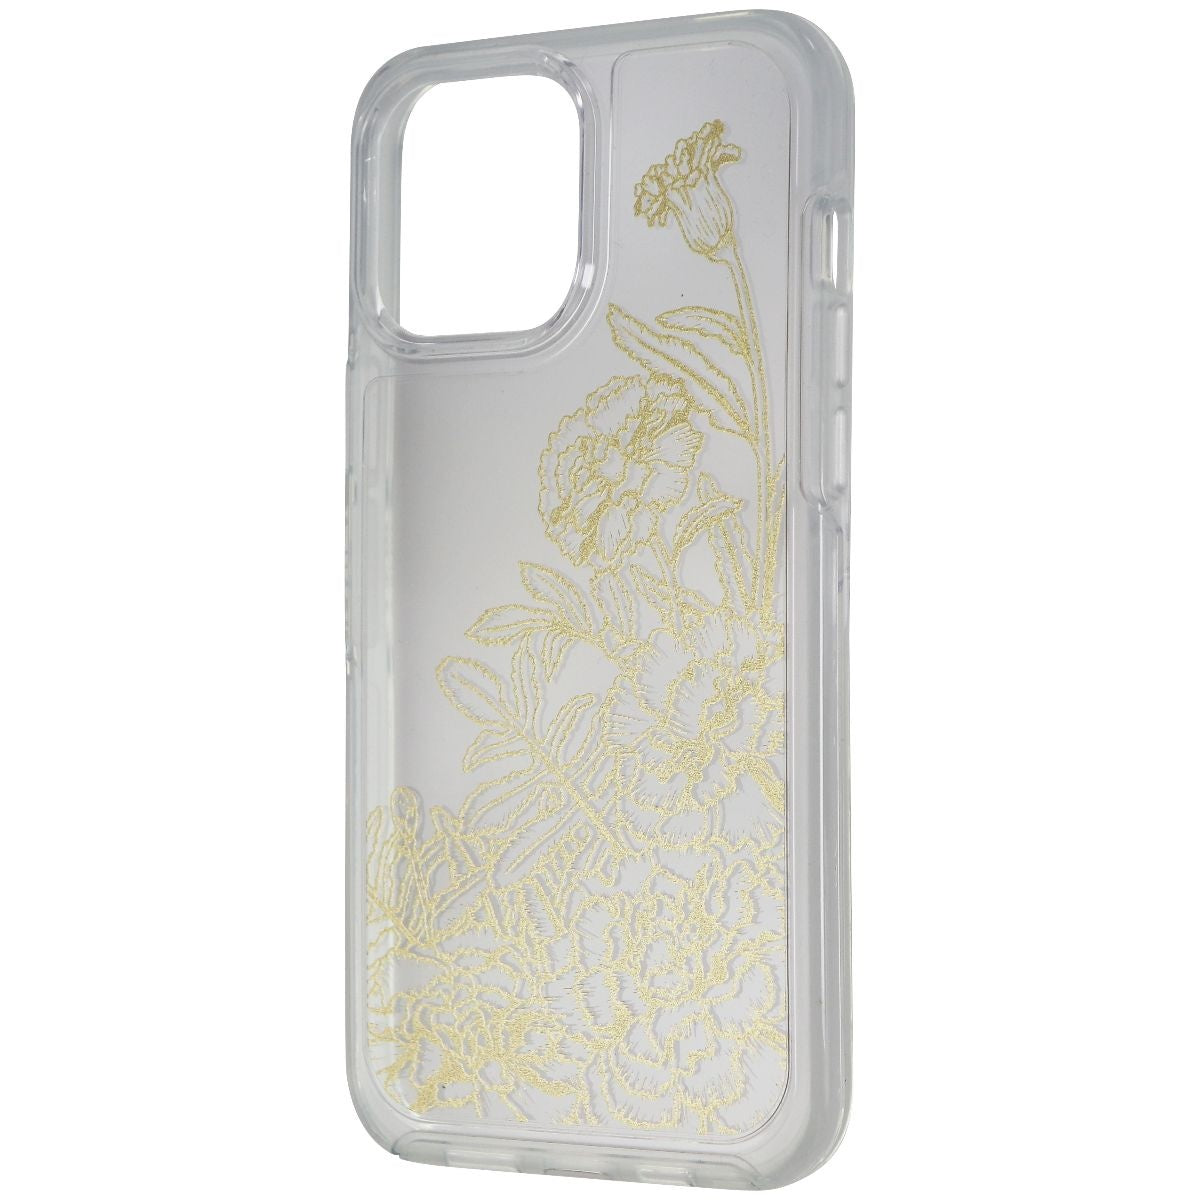 OtterBox Symmetry Series Case for iPhone 13 Pro Max / 12 Pro Max - Marigold